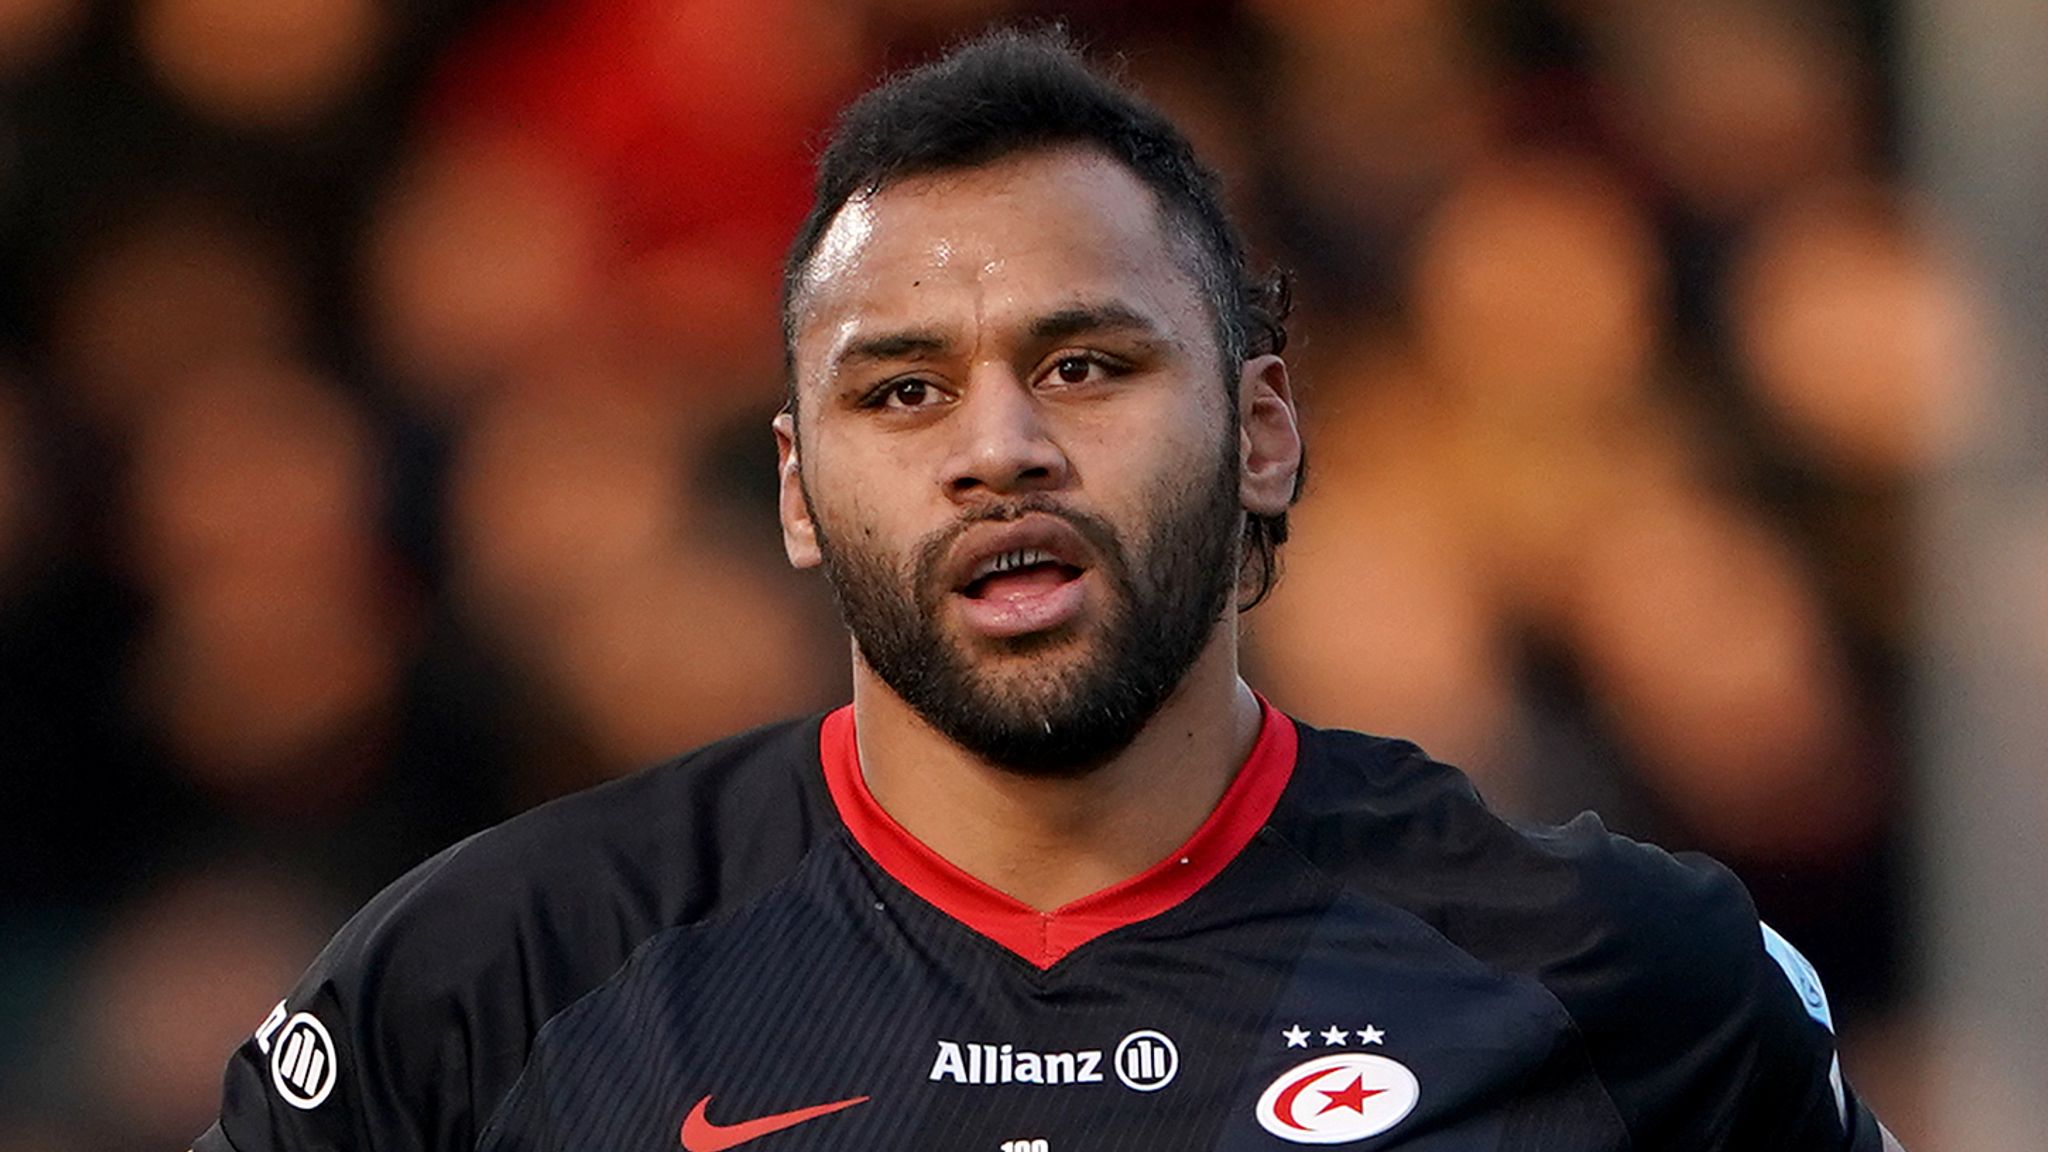 Billy Vunipola of Saracens reacts to supporters during the 2020 Greene King  IPA Championship 1st leg play off final match between Ealing Trailfinders  and Saracens at Castle Bar, West Ealing, England on